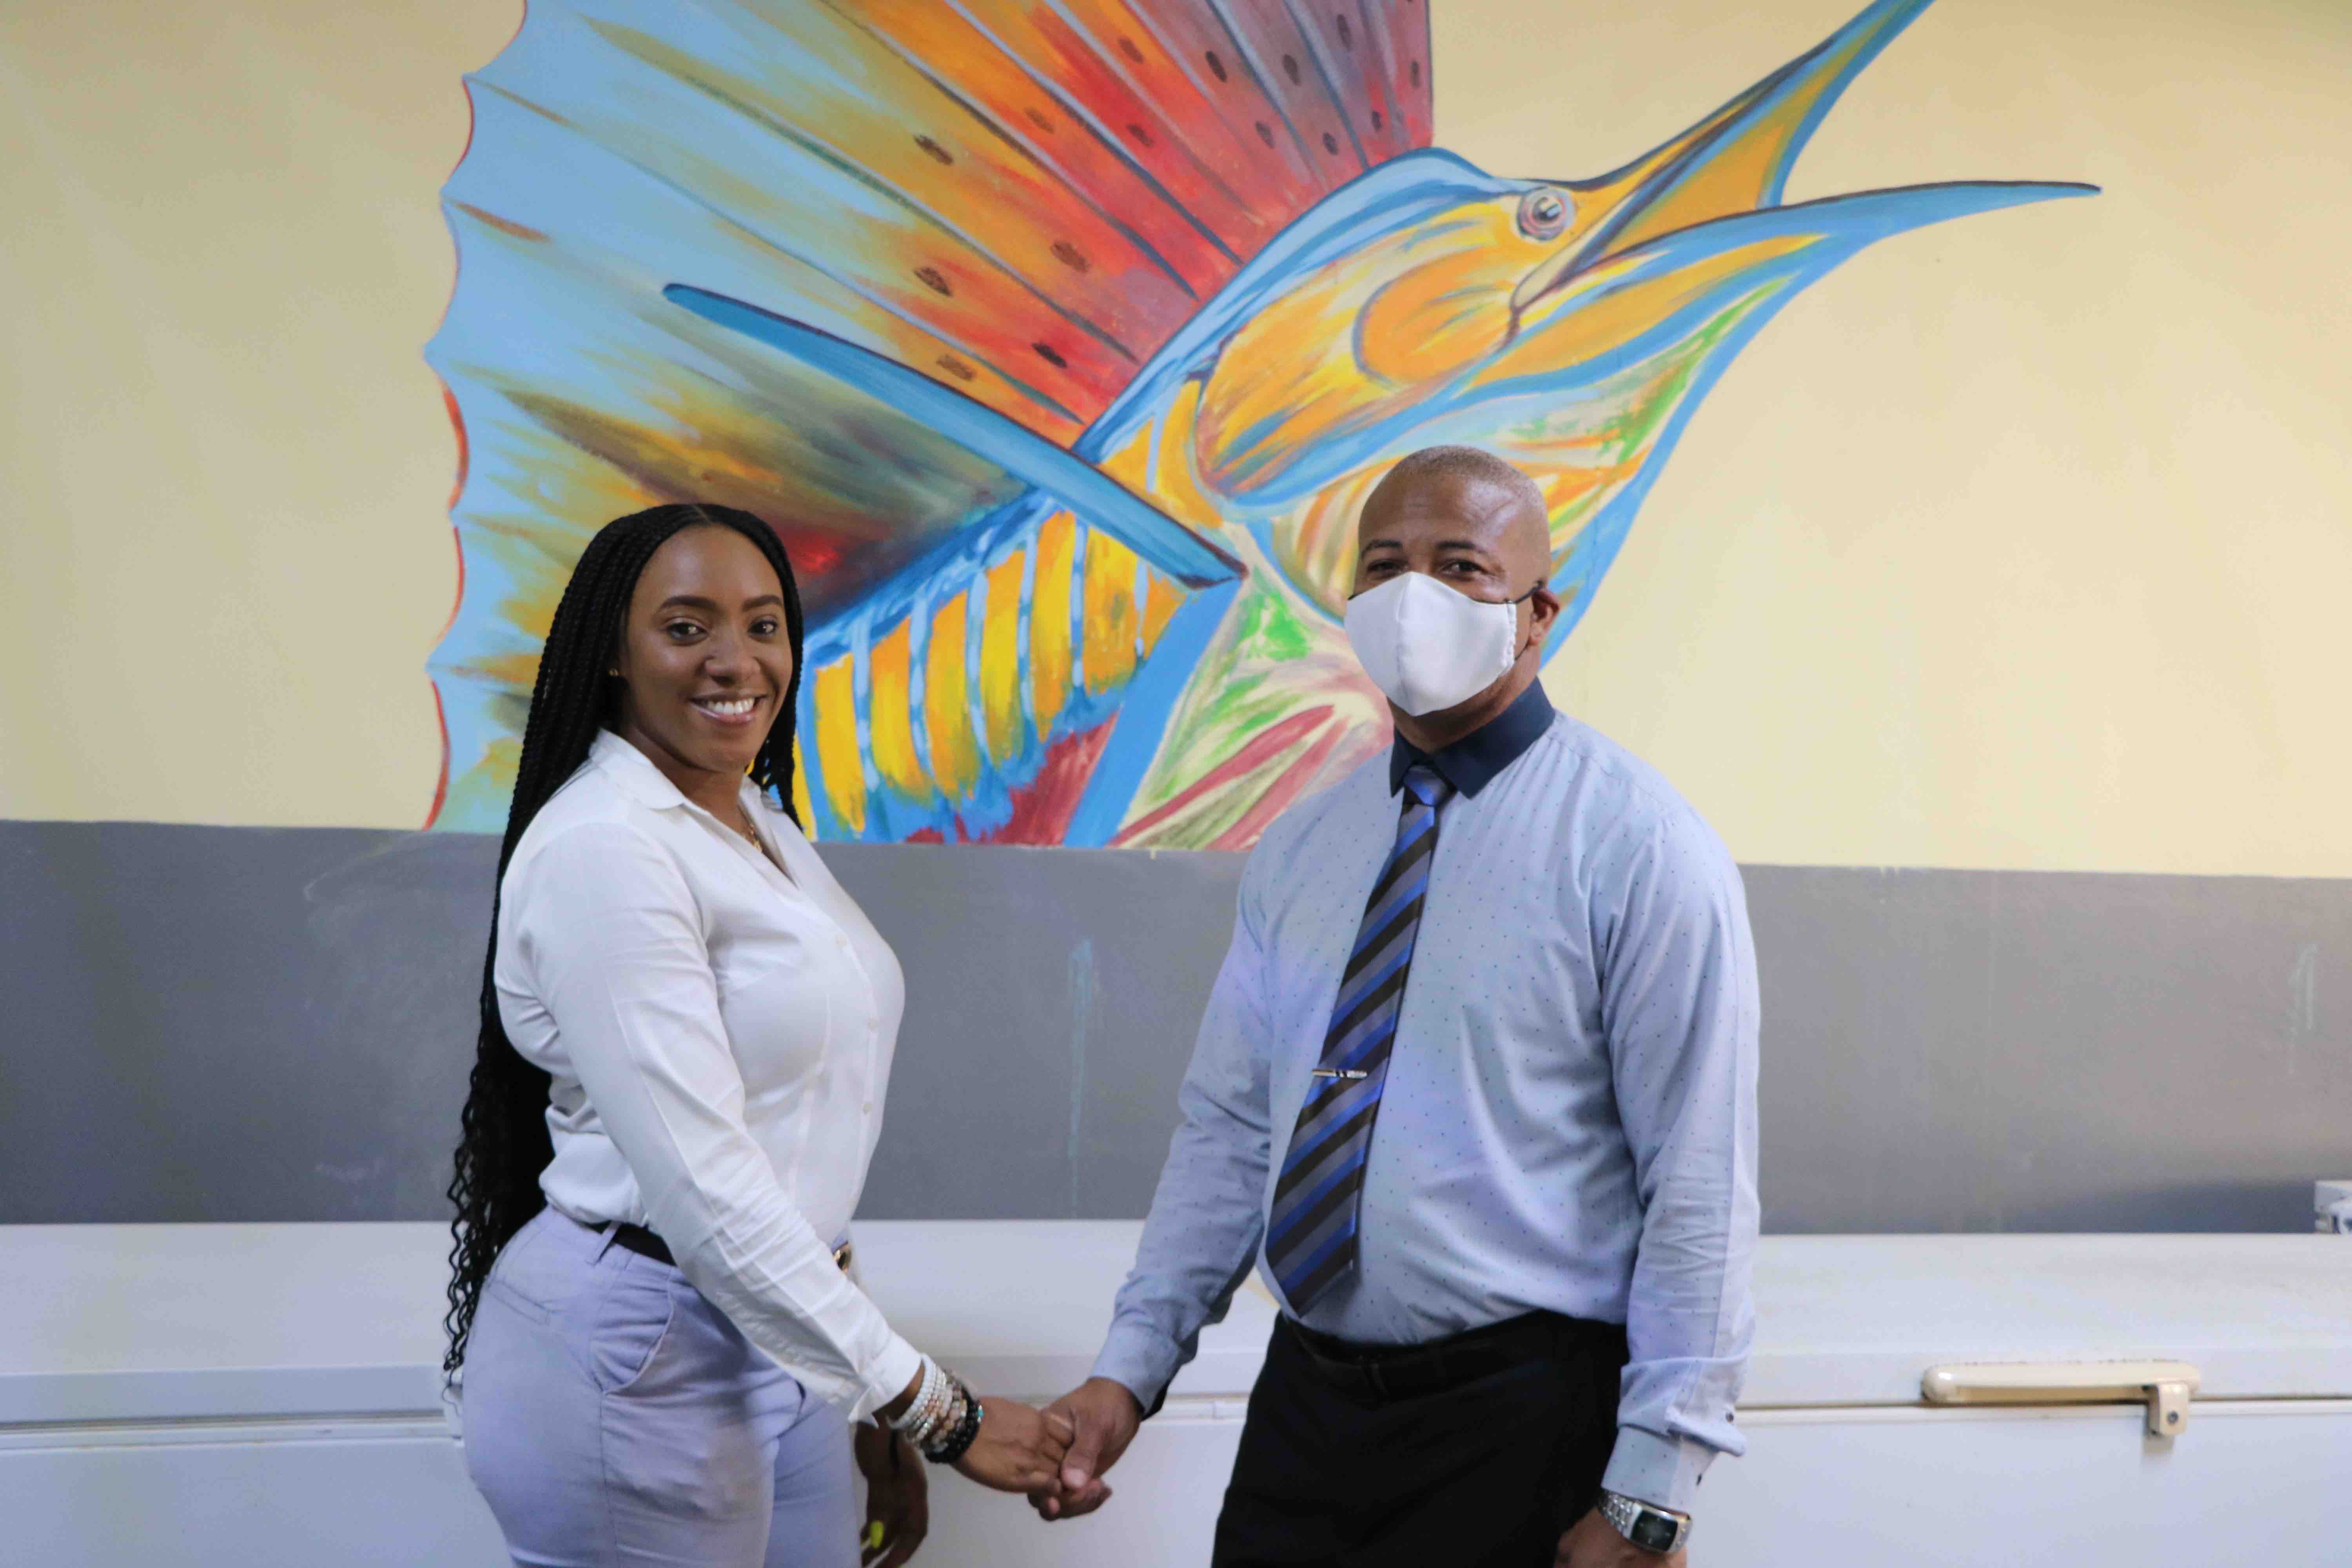 L-r) Ms. Melissa Allen, Manager of Nevis Fishermen's Marketing and Supply Cooperative Society Limited, welcomes Hon. Spencer Brand, Minister of Communication and Works during a visit to the newly refurbished fisheries facility on June 17, 2020